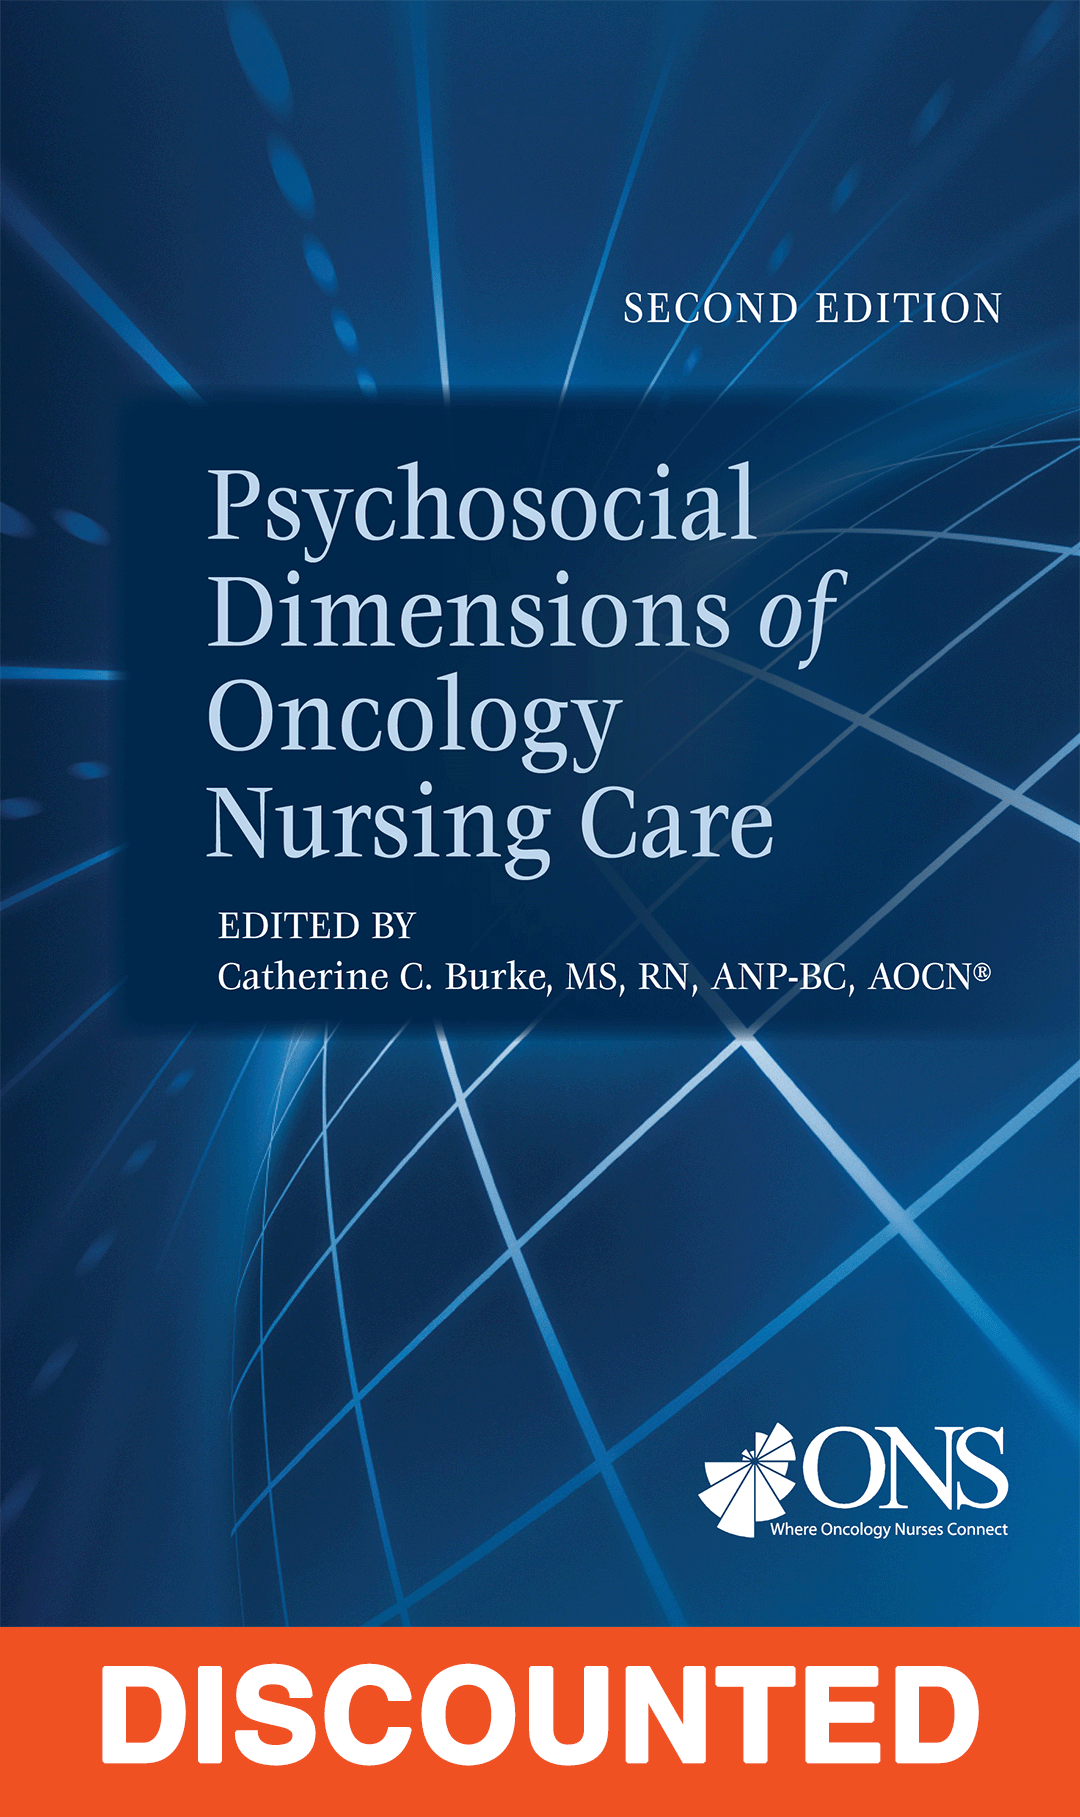 Psychosocial Dimensions of Oncology Nursing Care (Second Edition)